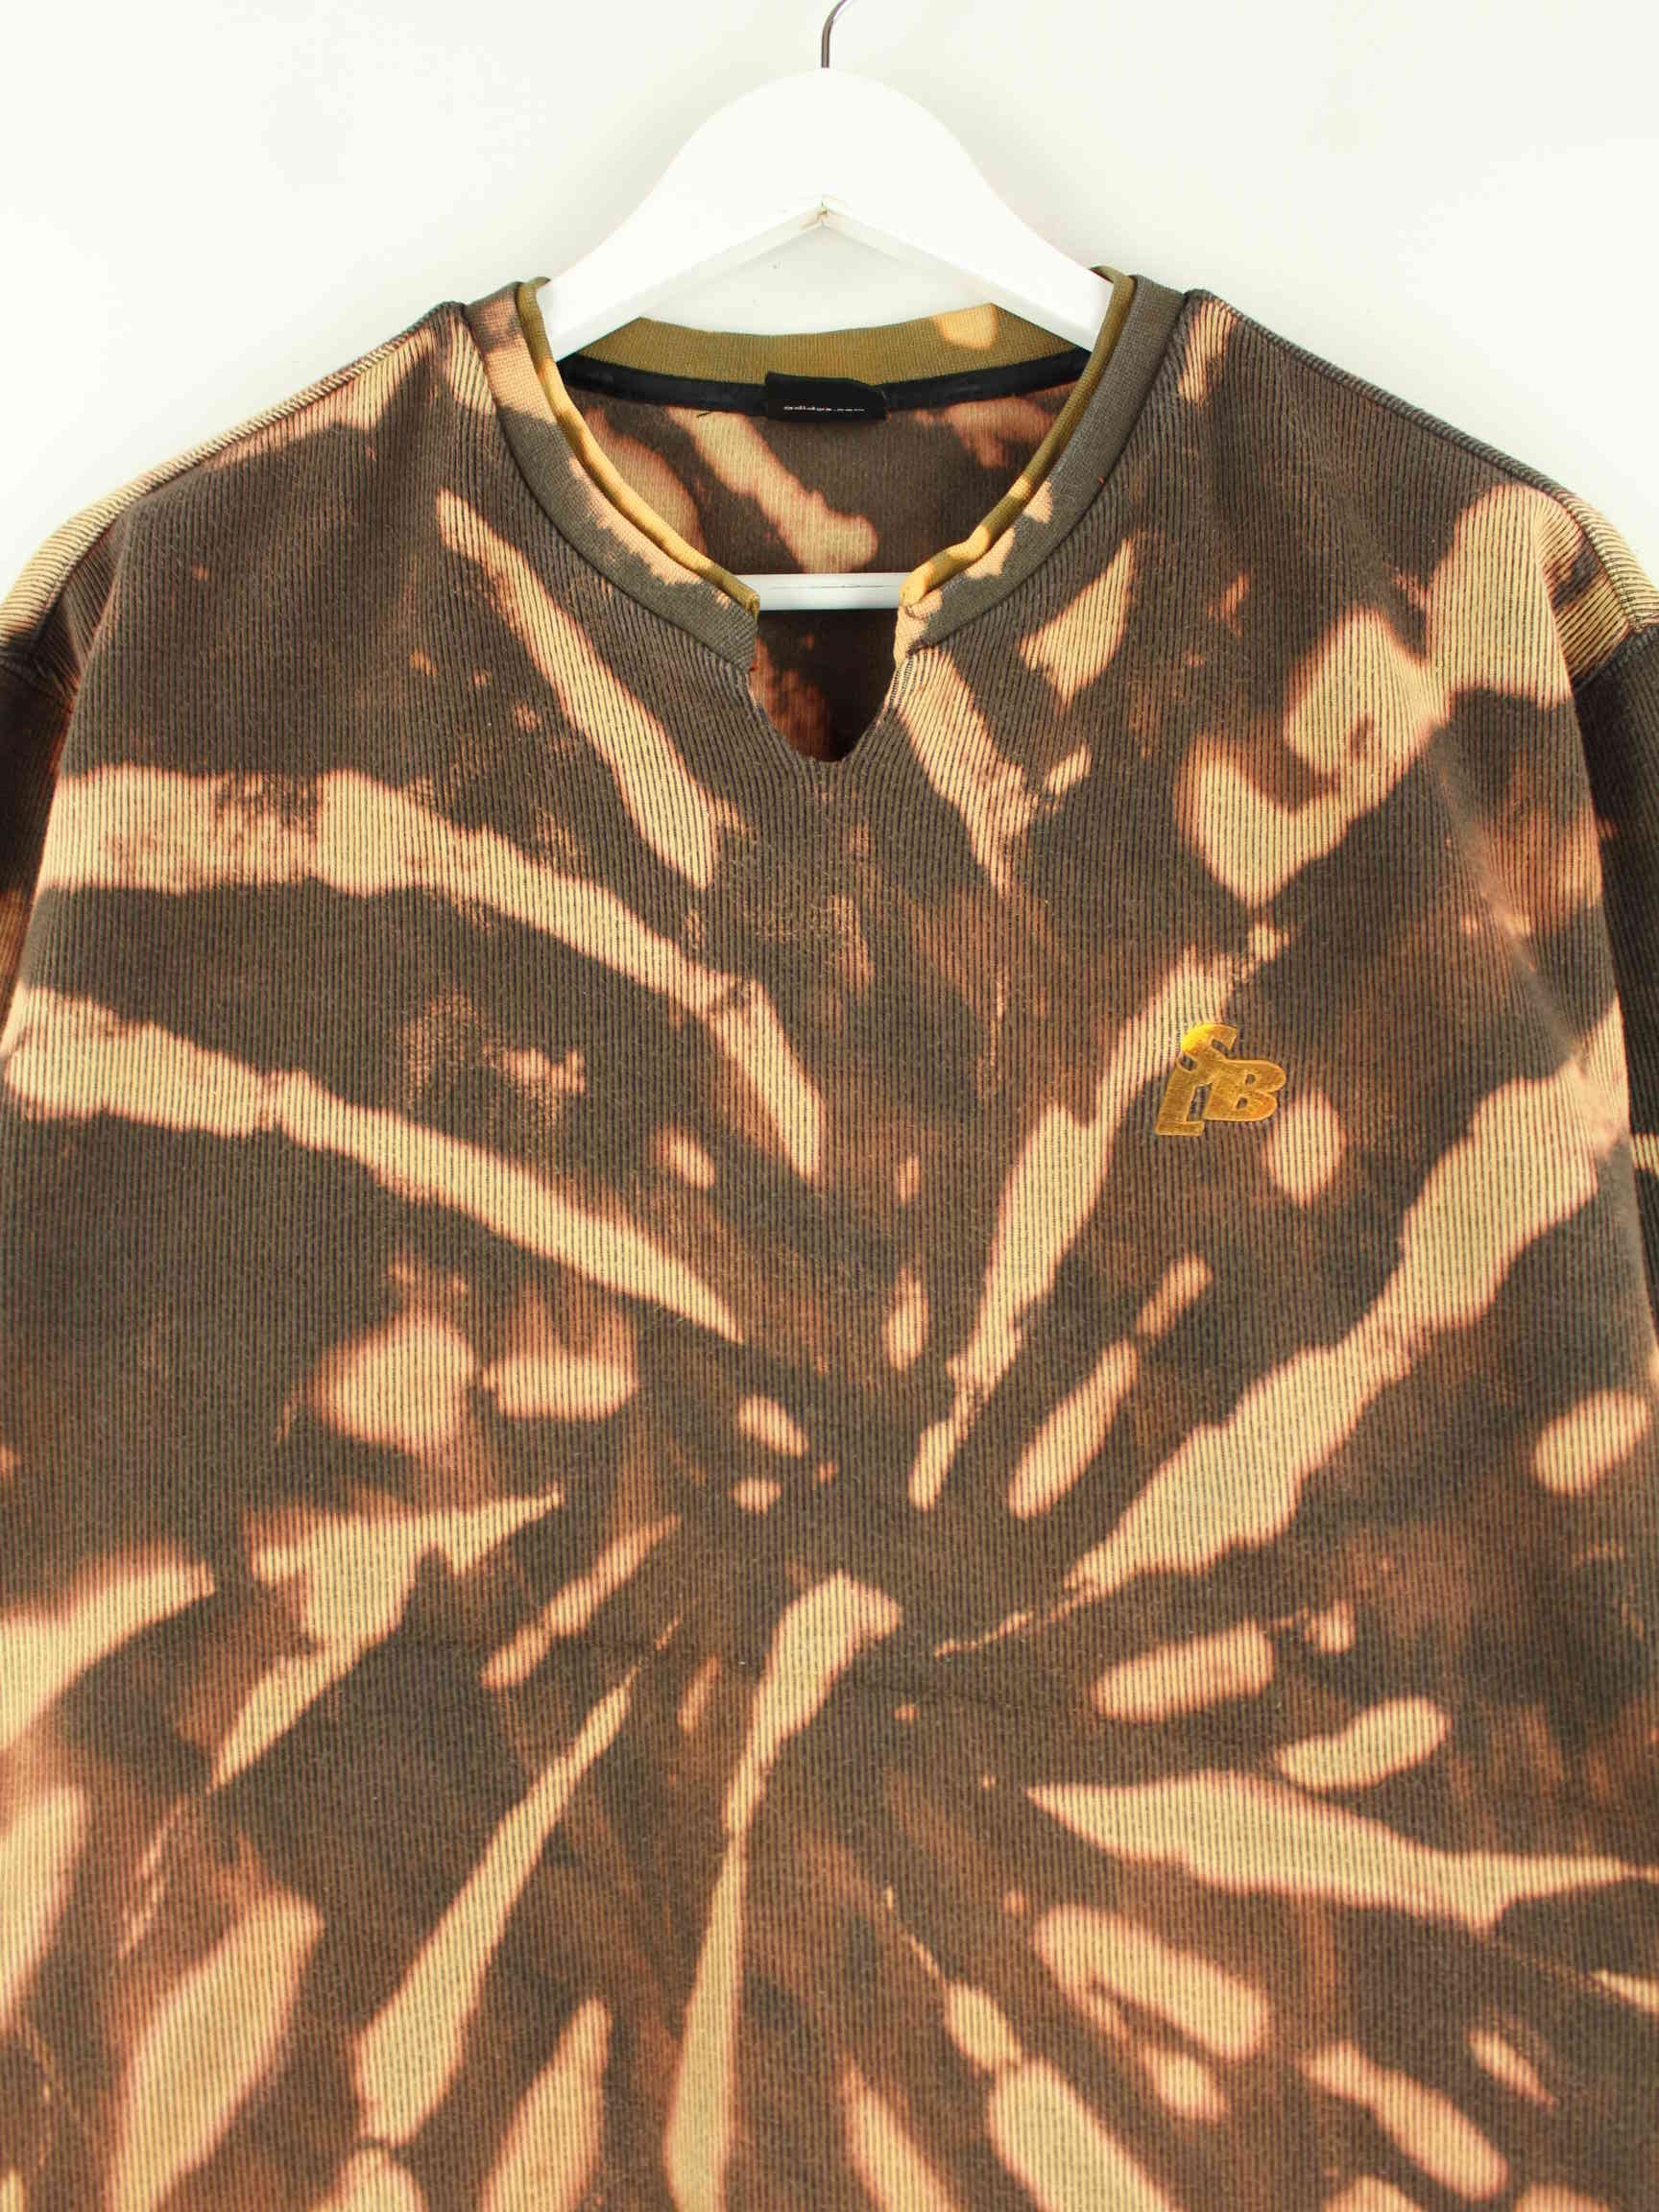 Adidas Embroidered Ripped Tie Dye Sweater Braun M (detail image 1)